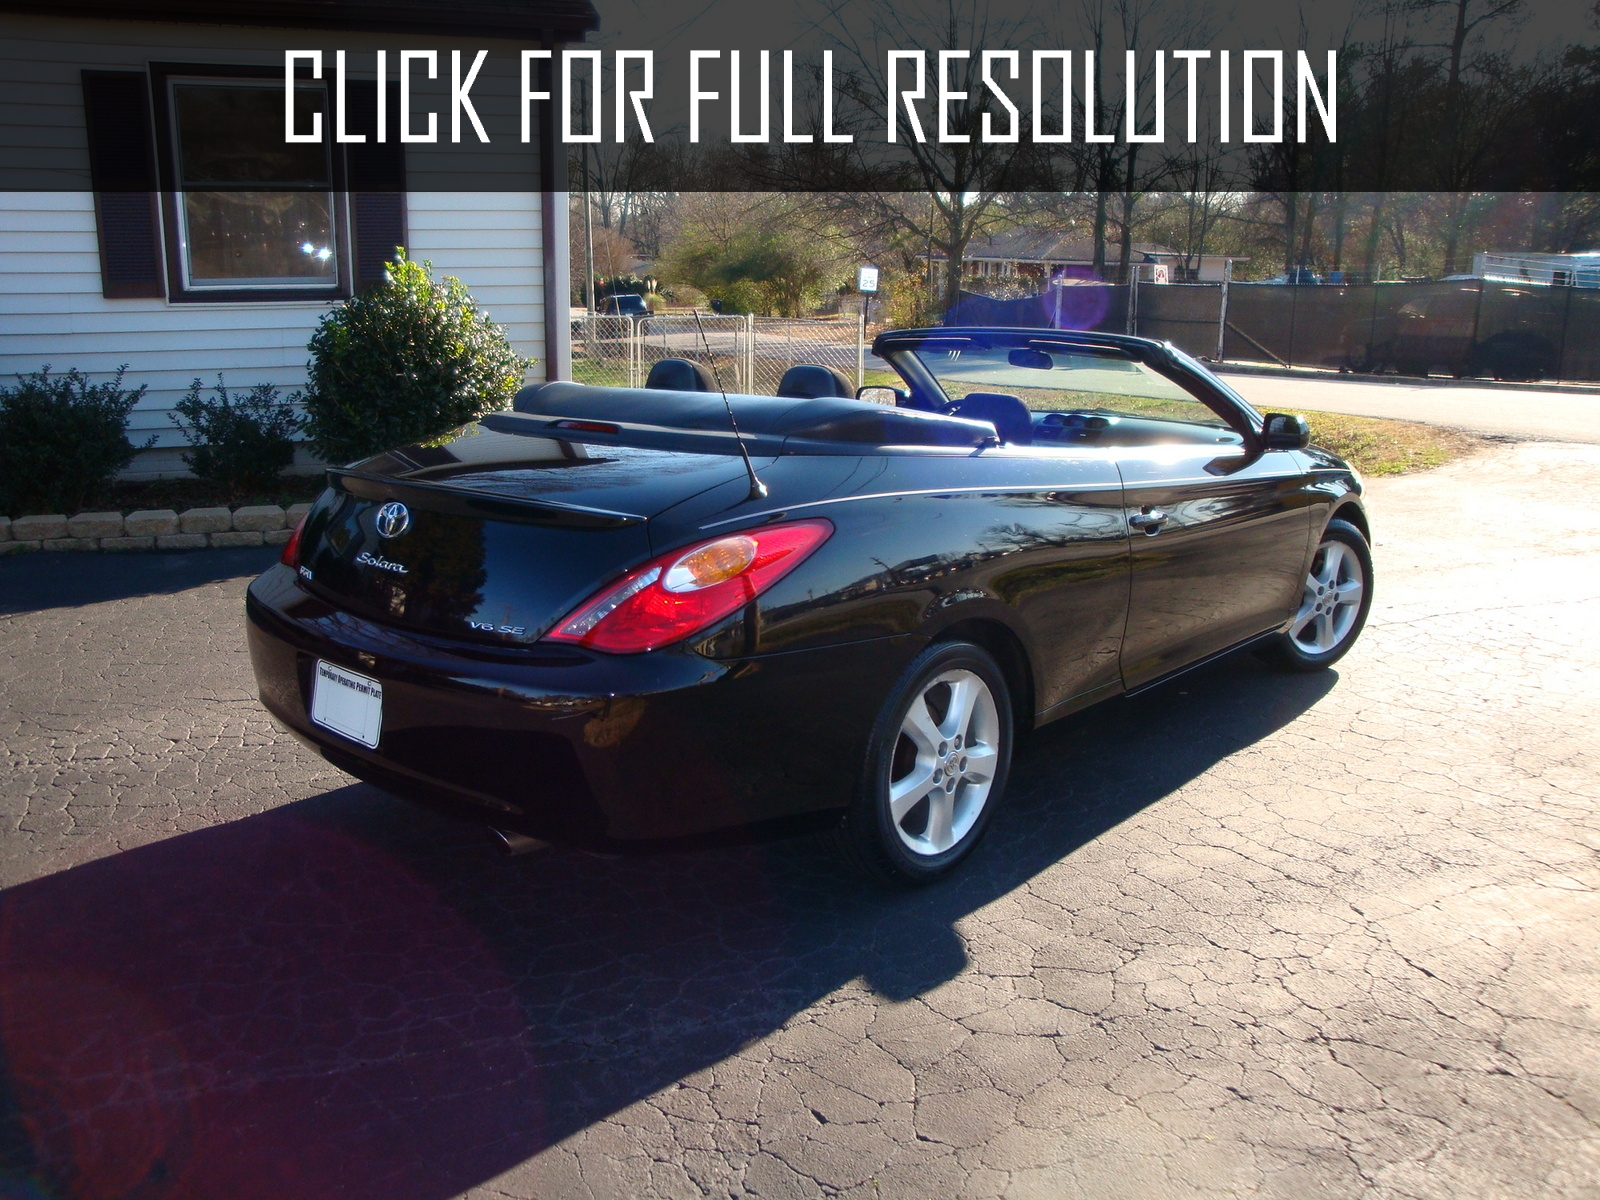 2006 Toyota Camry Convertible